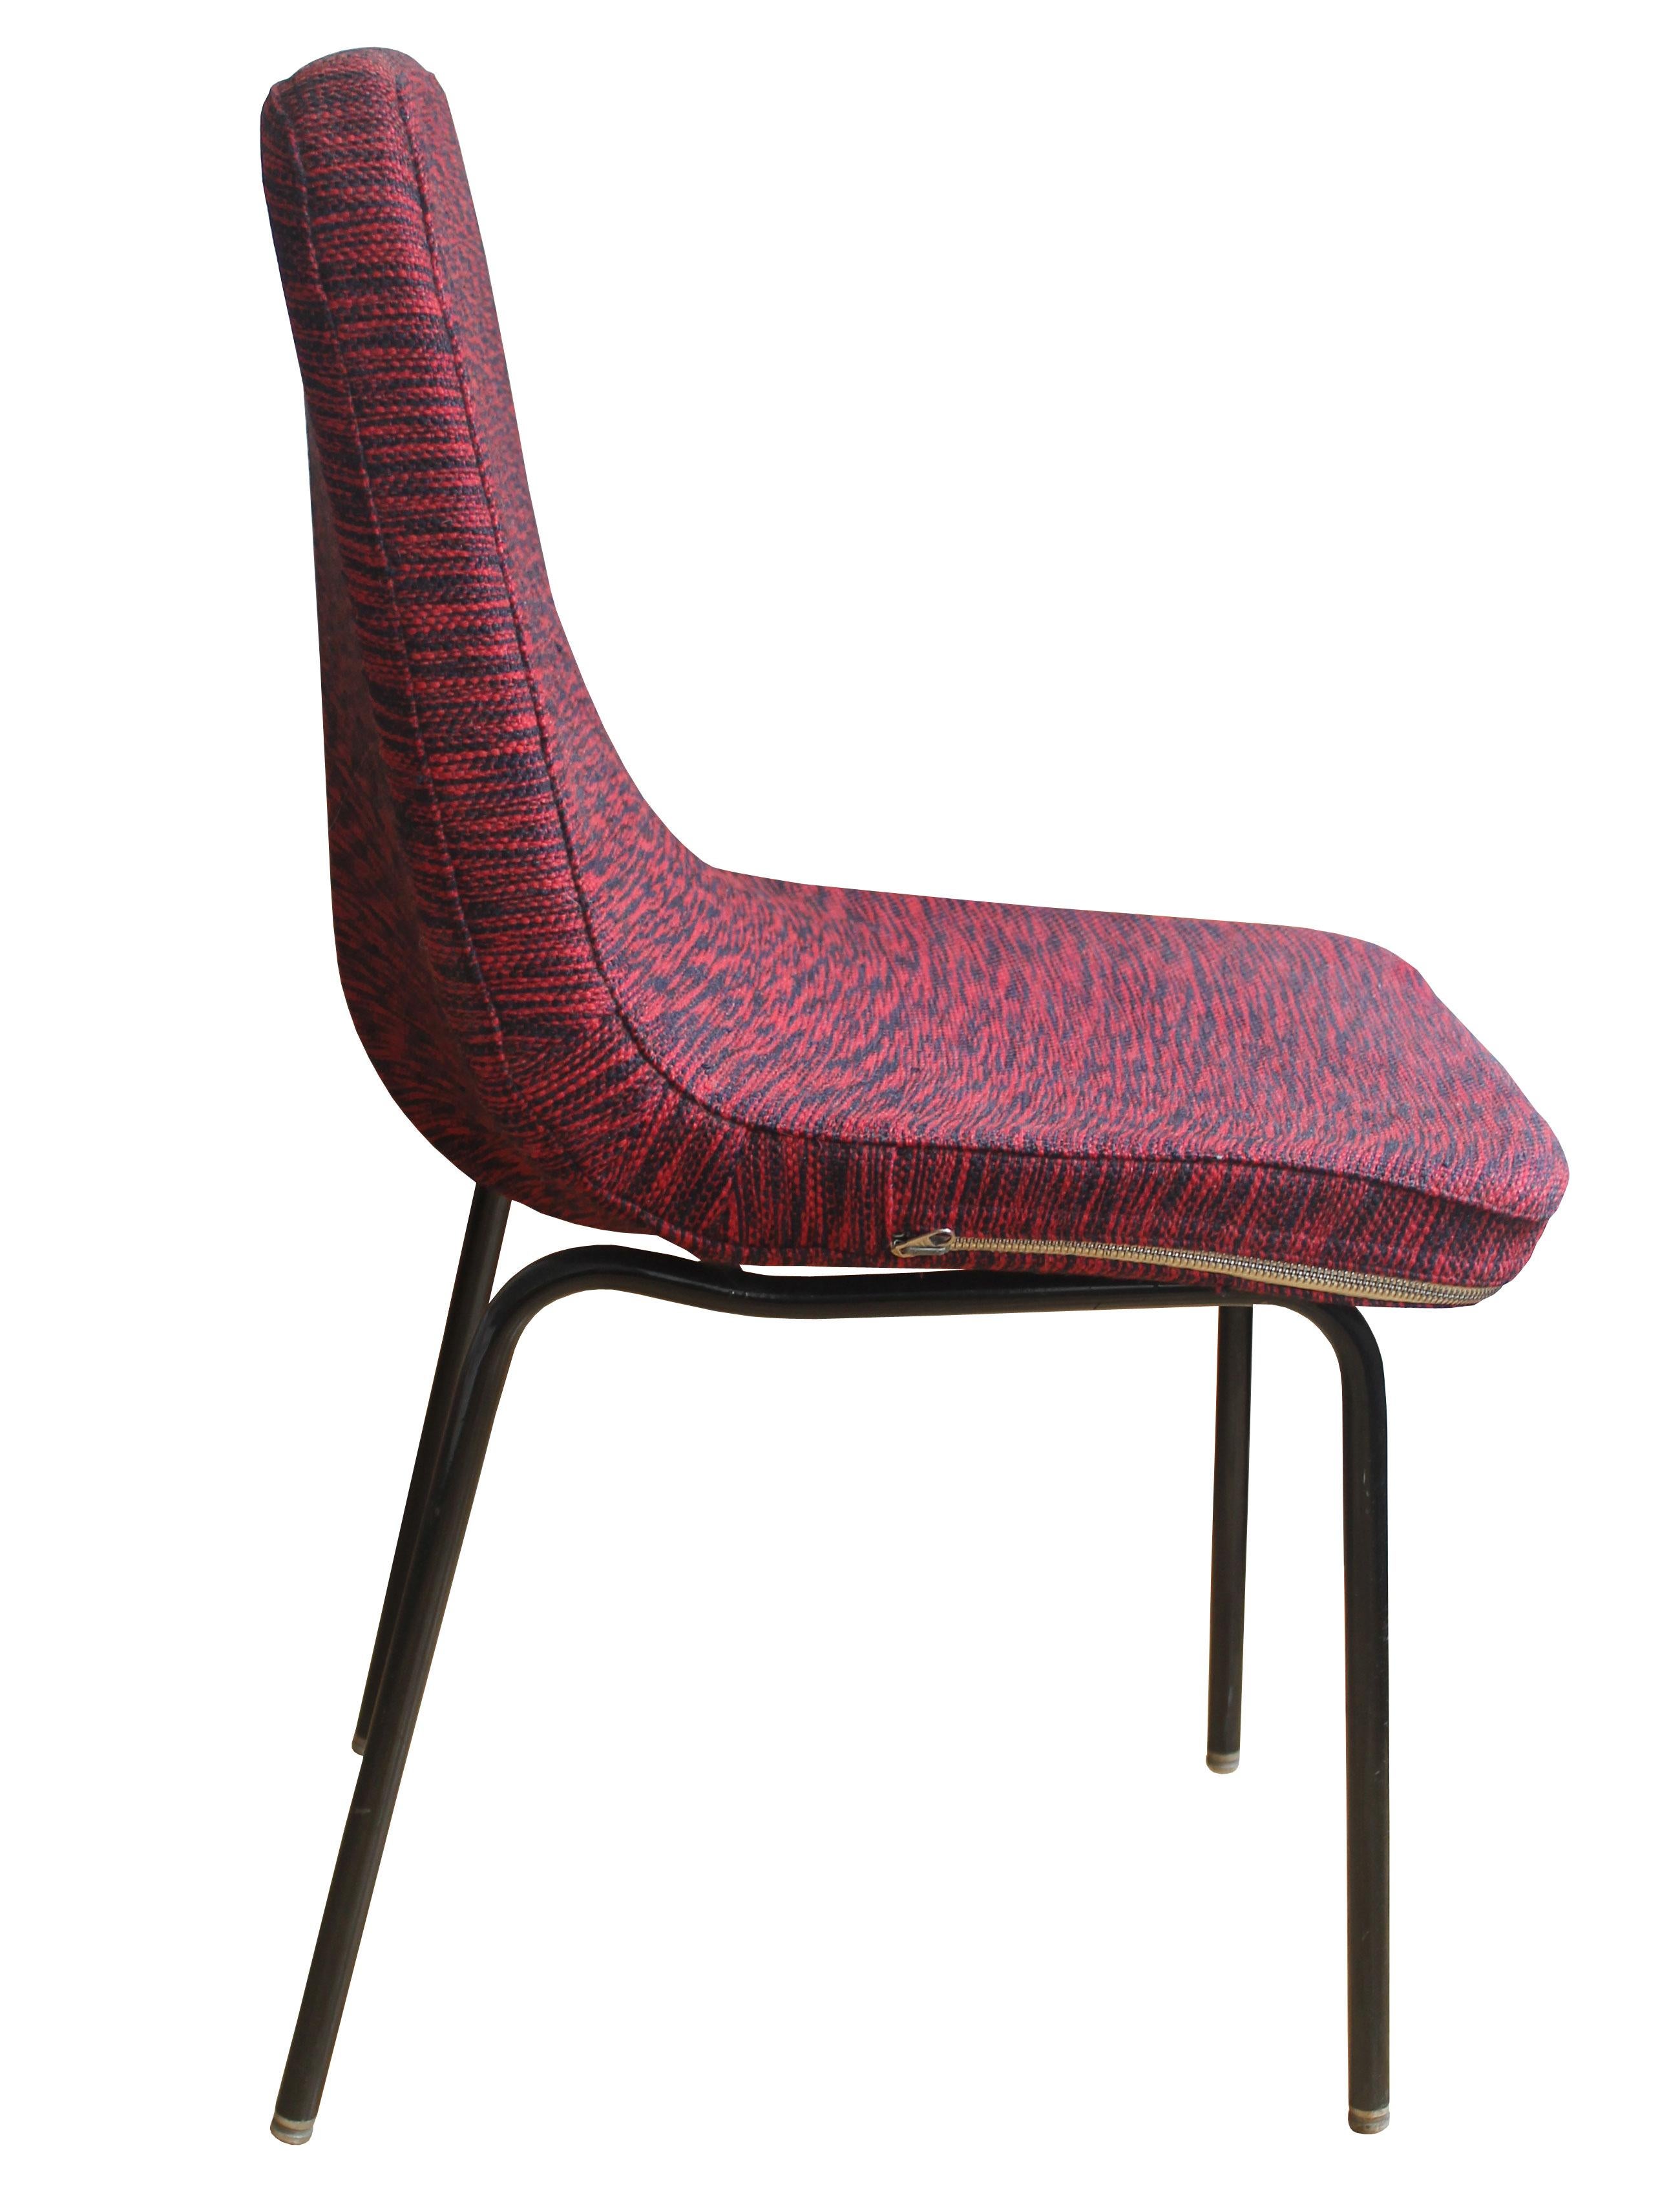 This Mid Century Dining / Office chair was designed in the 1960’s and was most likely produced in one of the factories of former East Germany or Czechoslovakia. The main design feature is the striking fabric cushion with the red and navy blue